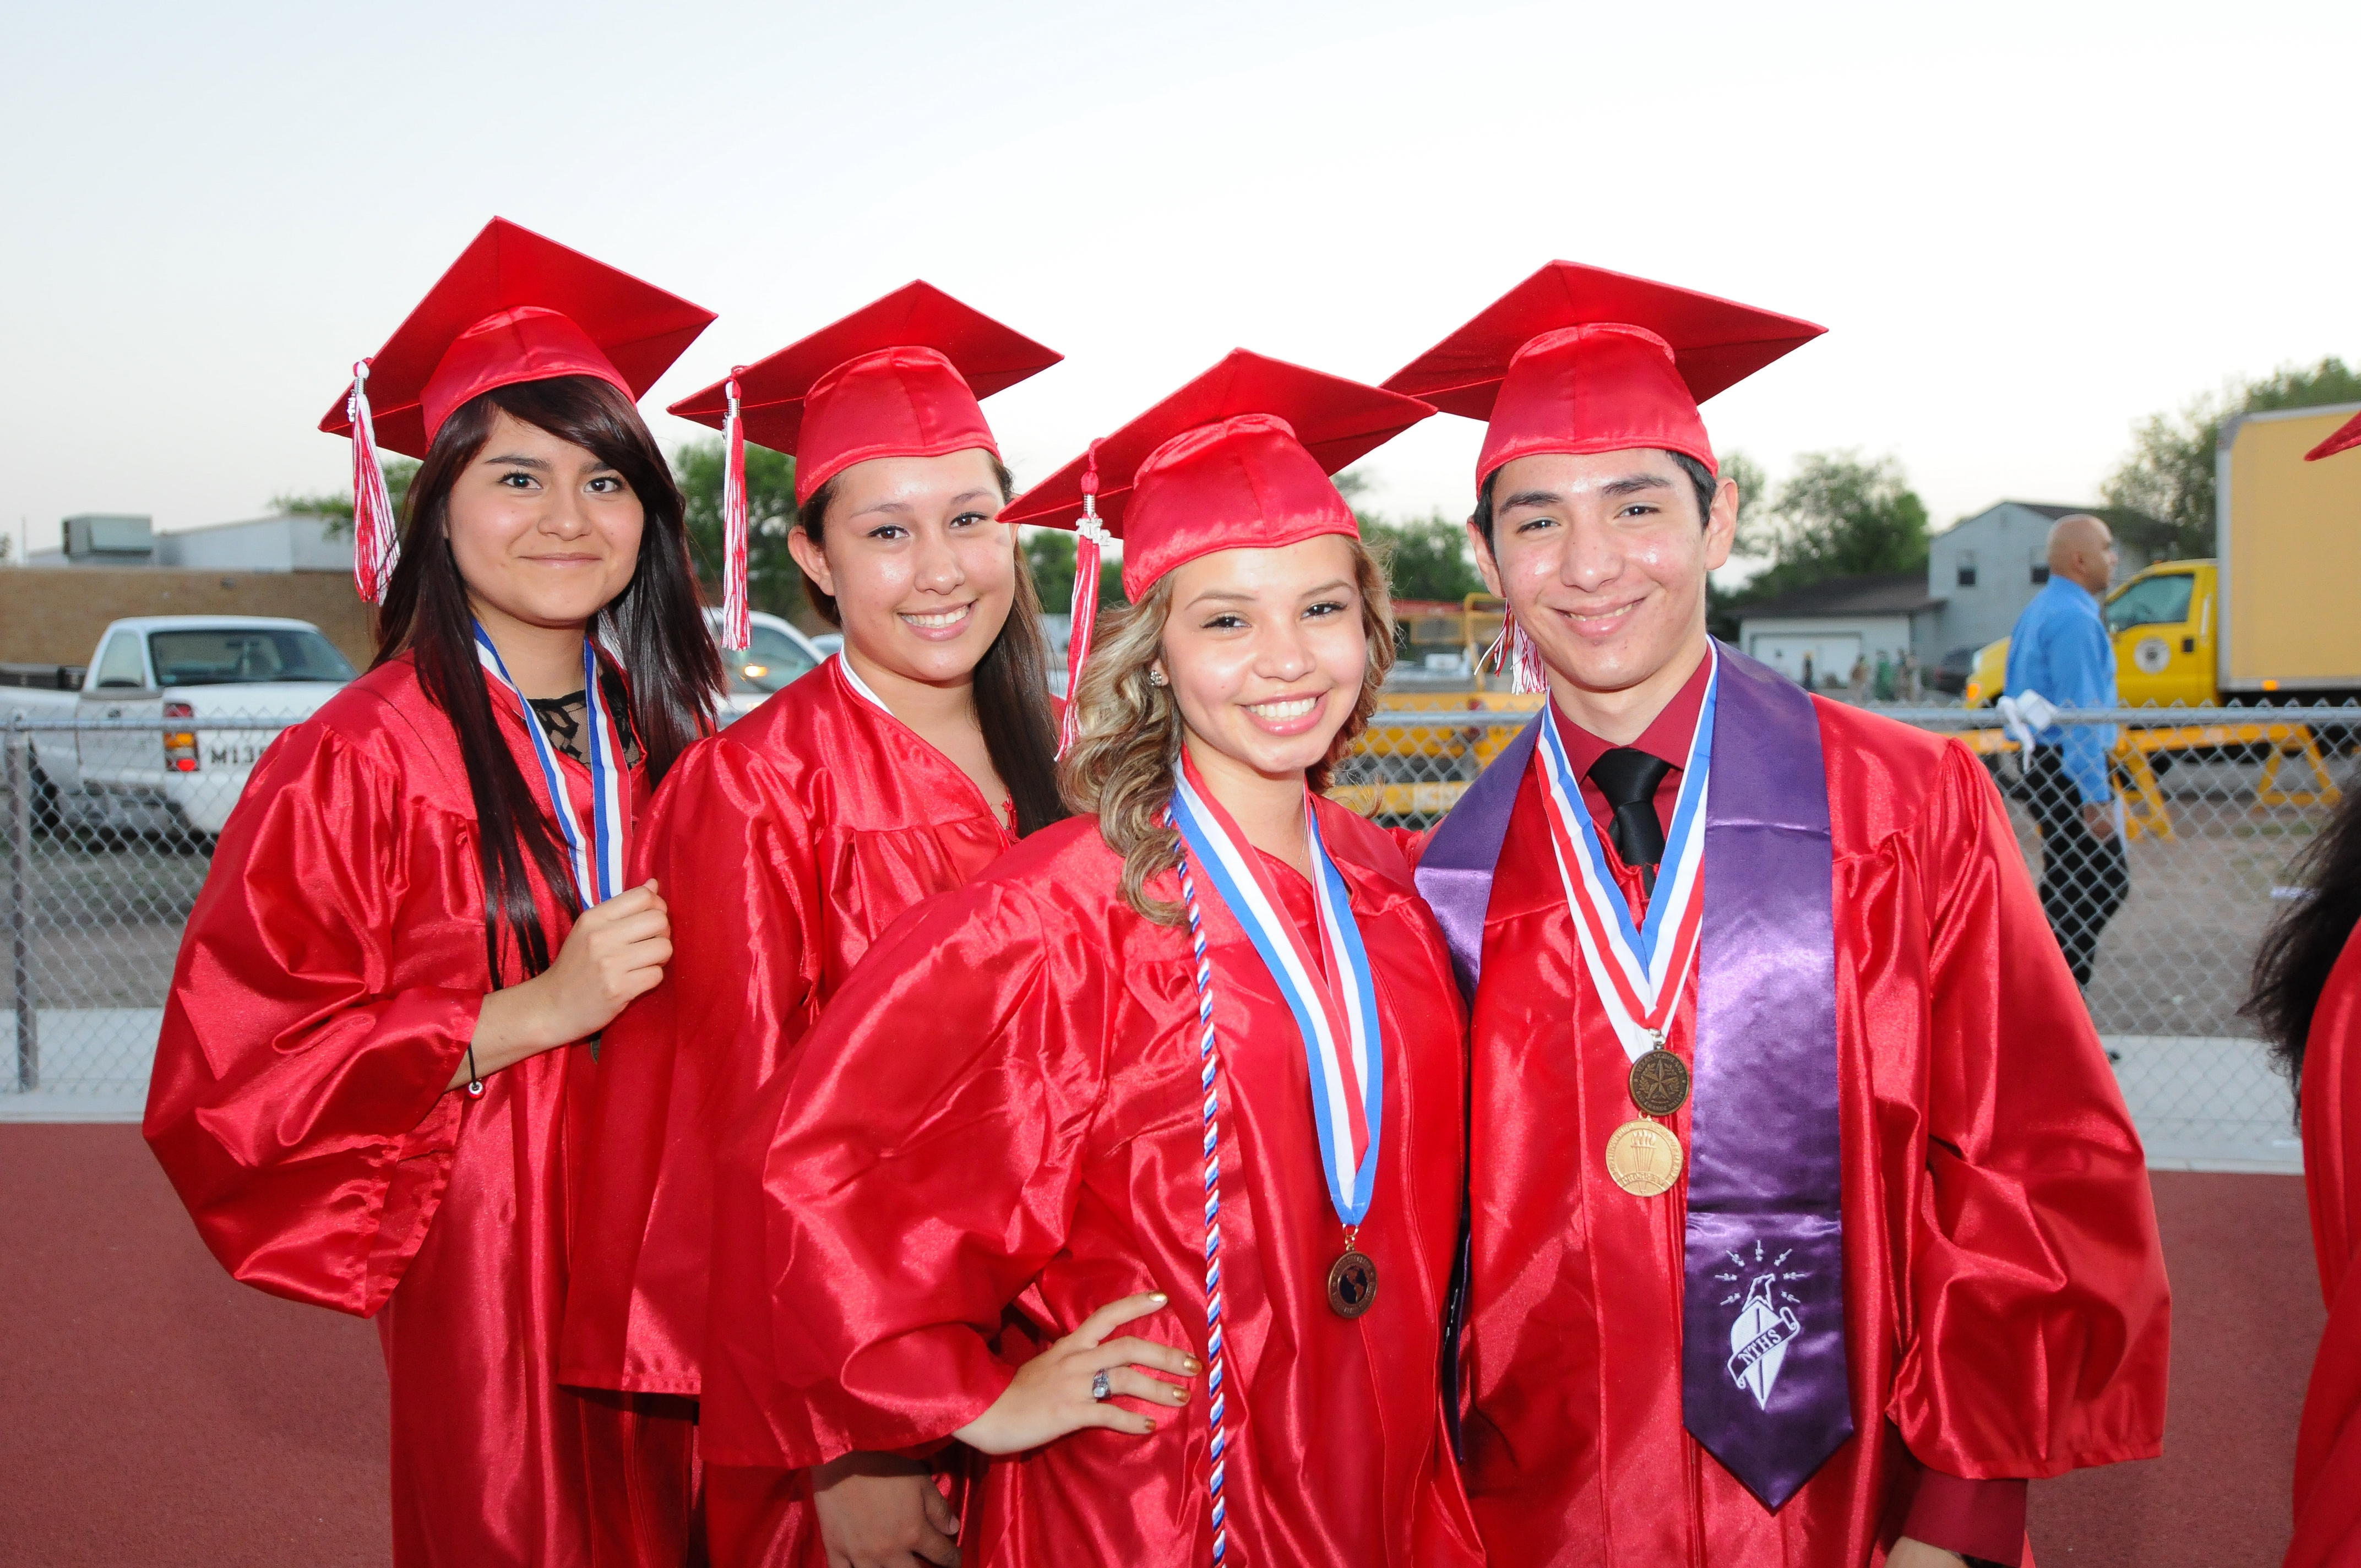 Seniors invited to attend assembly for Graduation Celebration